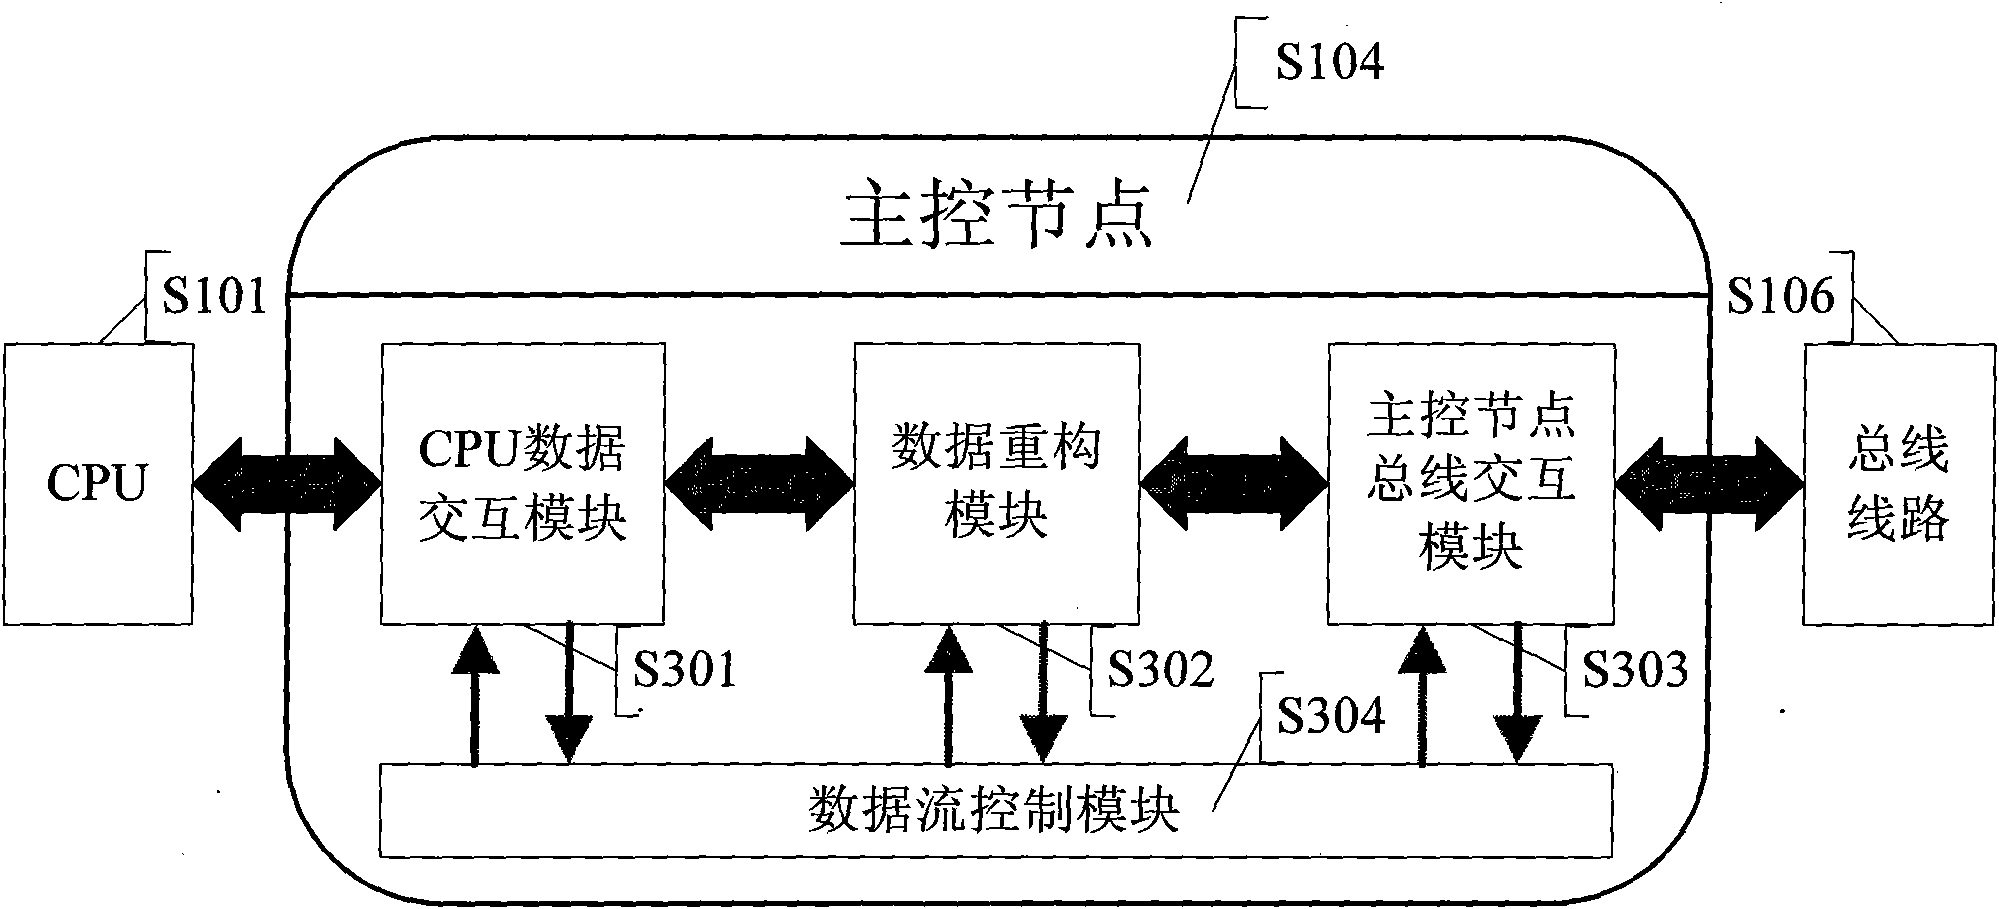 High-speed serial buss system capable of being dynamically reconfigured and control method thereof